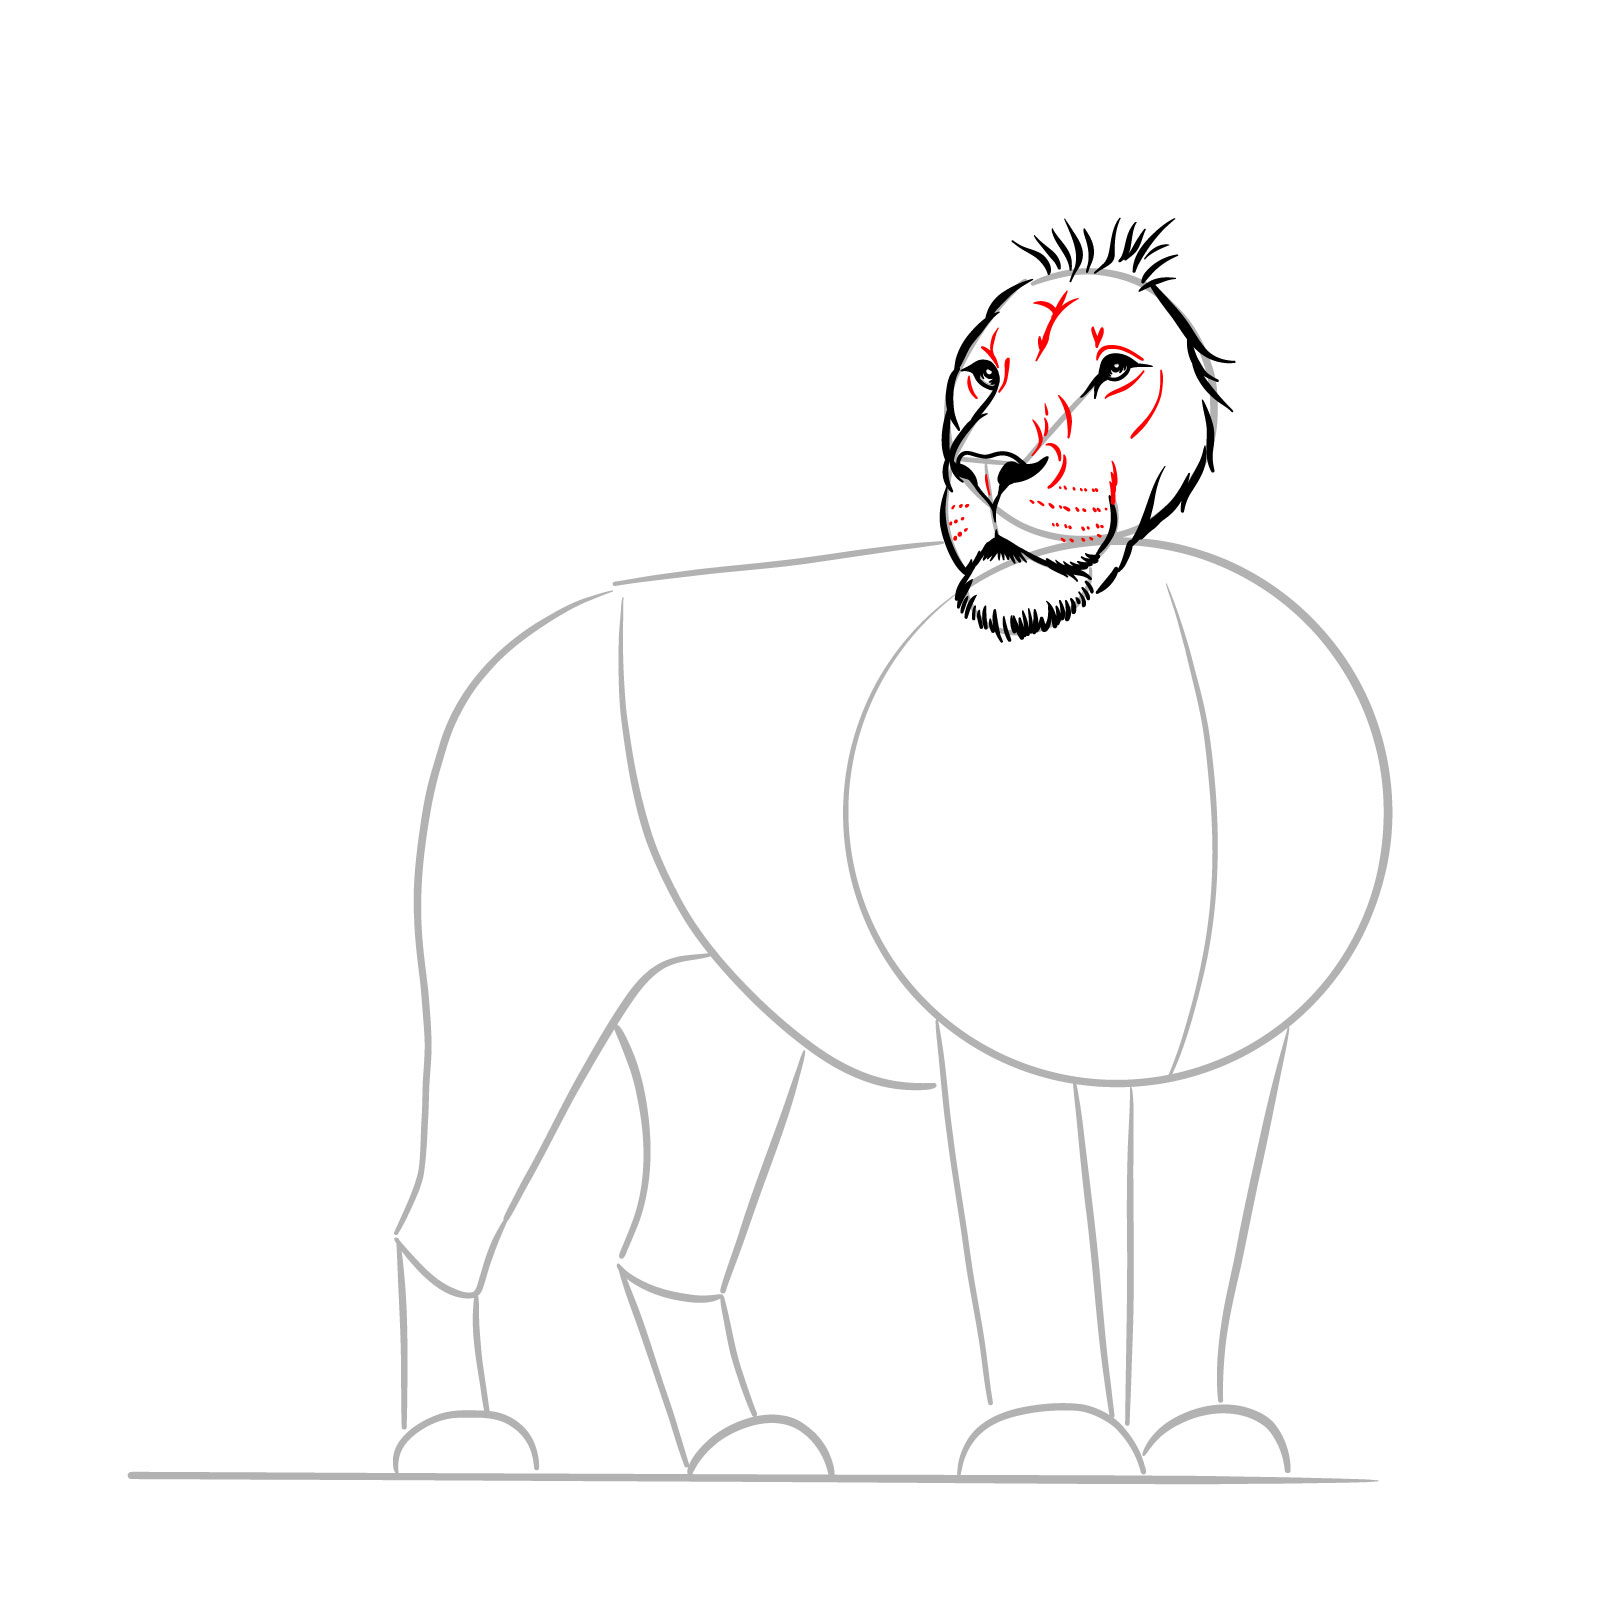 Detailing the facial features in a step-by-step standing lion drawing - step 06